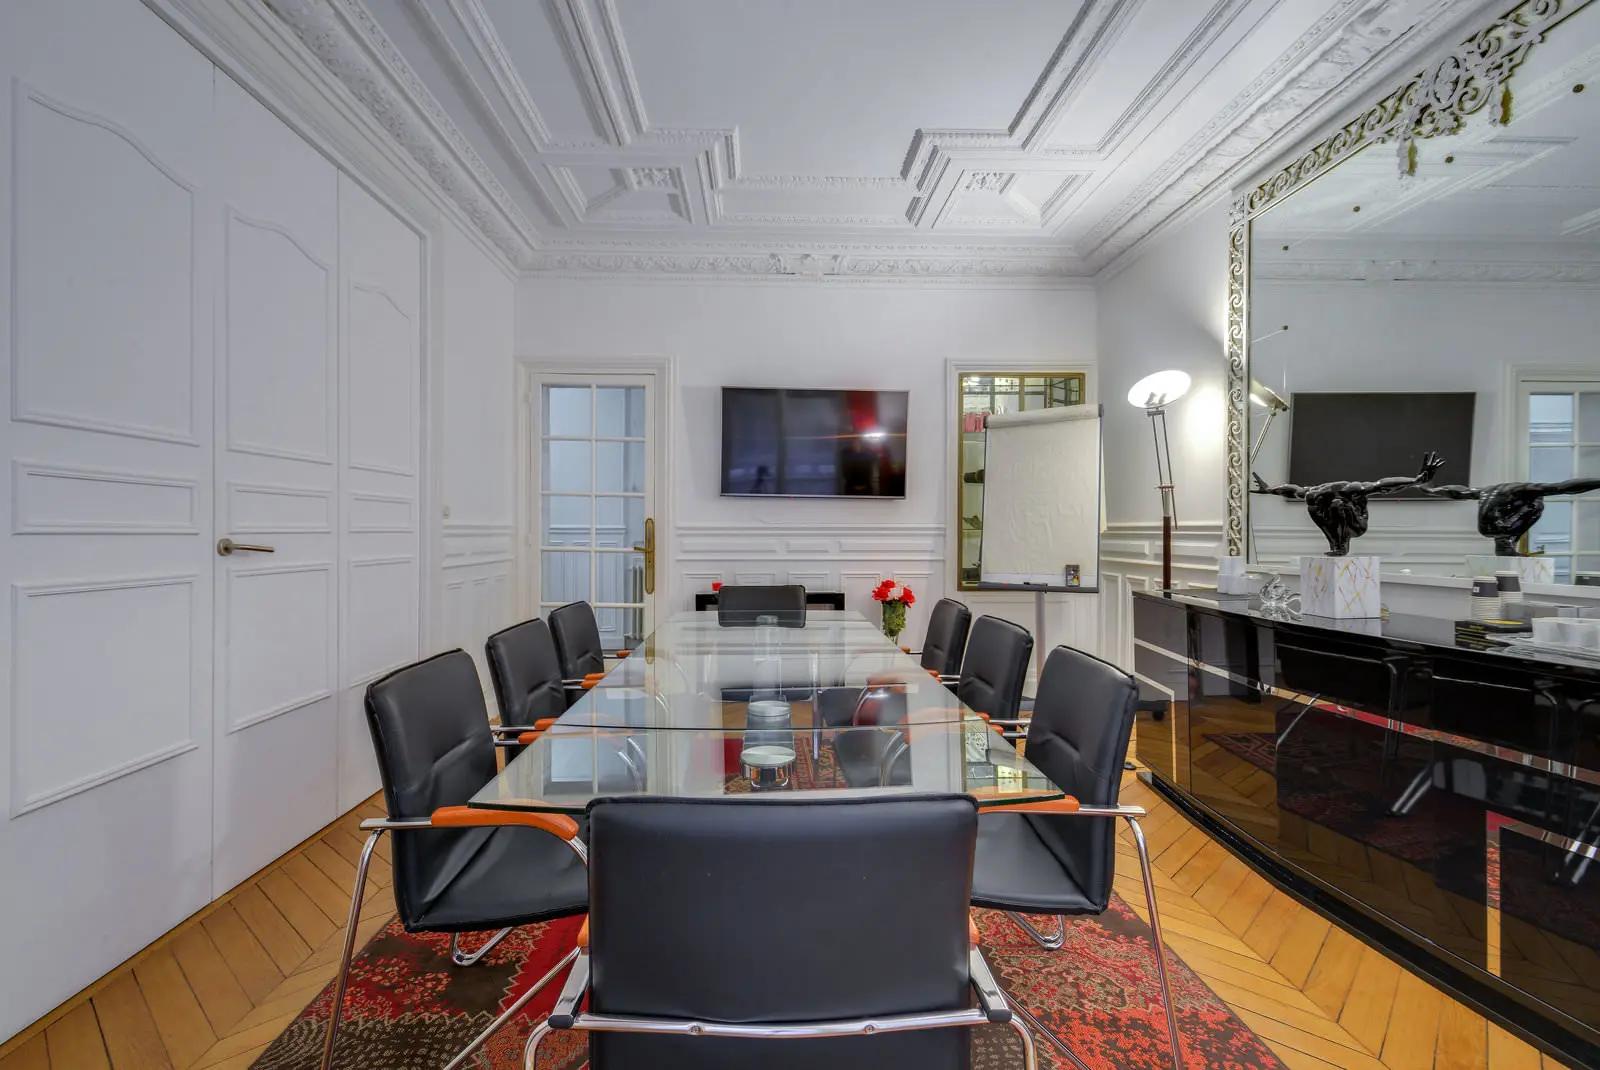 Meeting room in Law firm, Haussmann apartment - 3